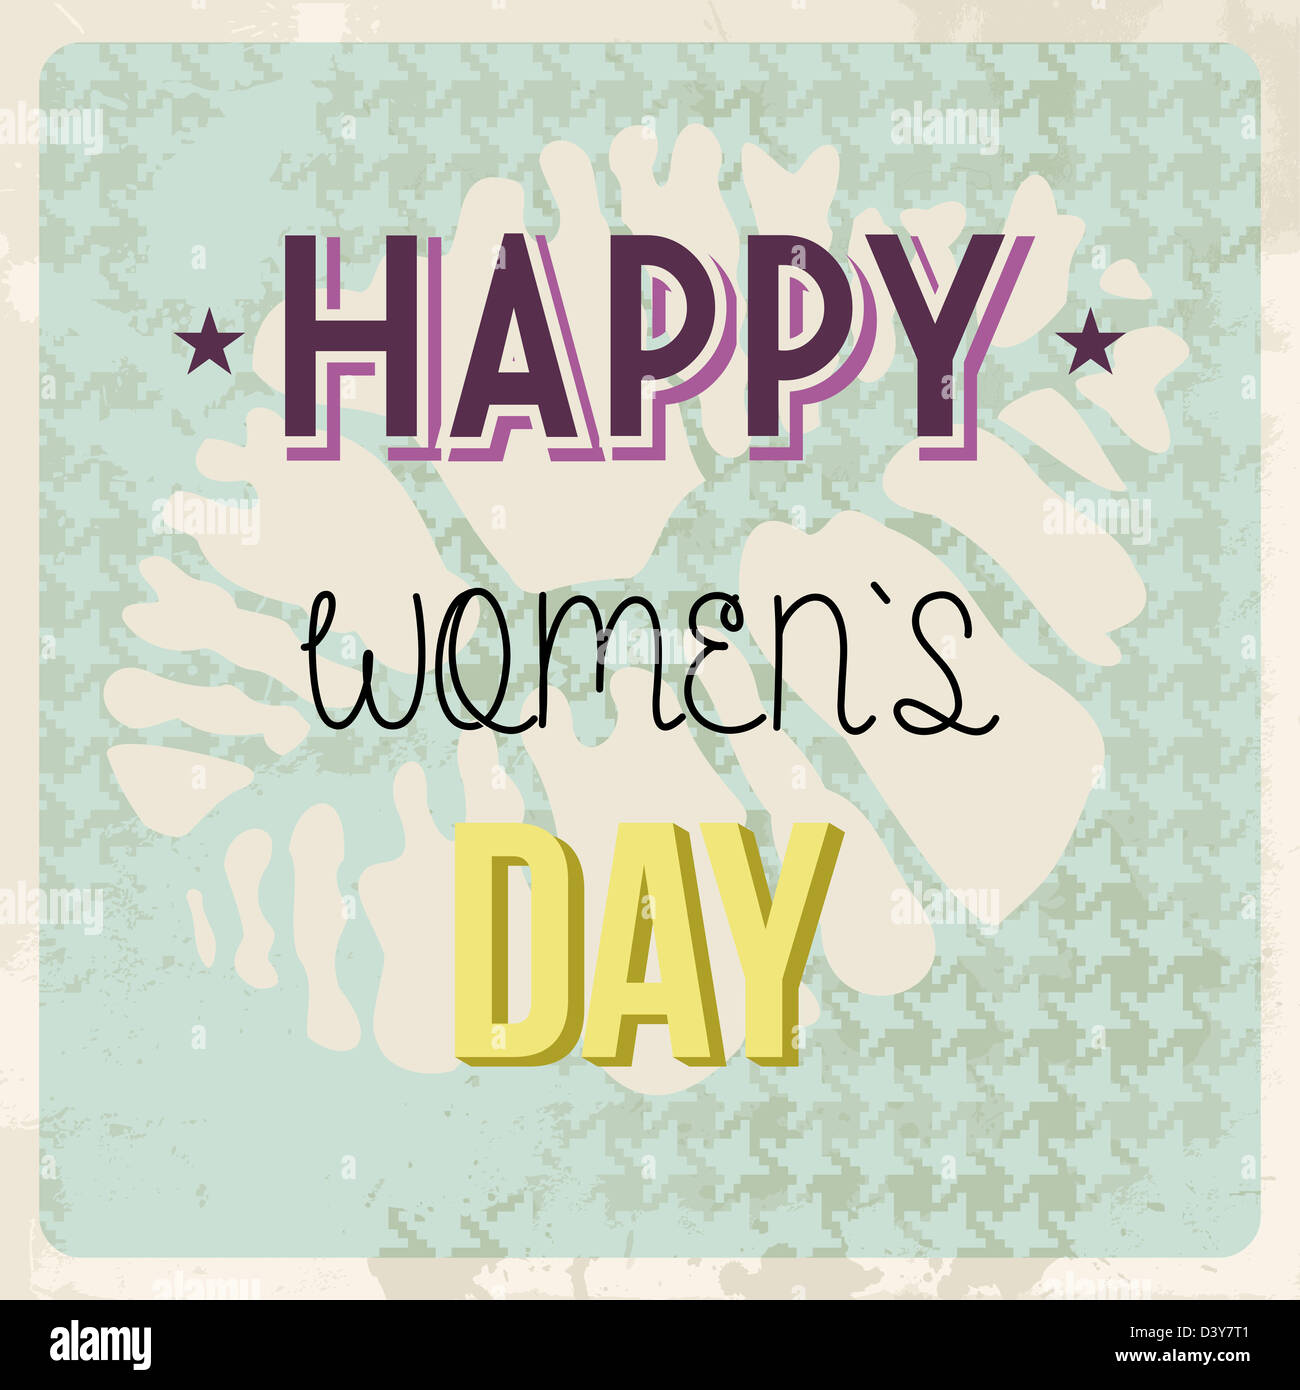 Grunge Happy woman day background. Vector illustration layered for easy manipulation and custom coloring. Stock Photo